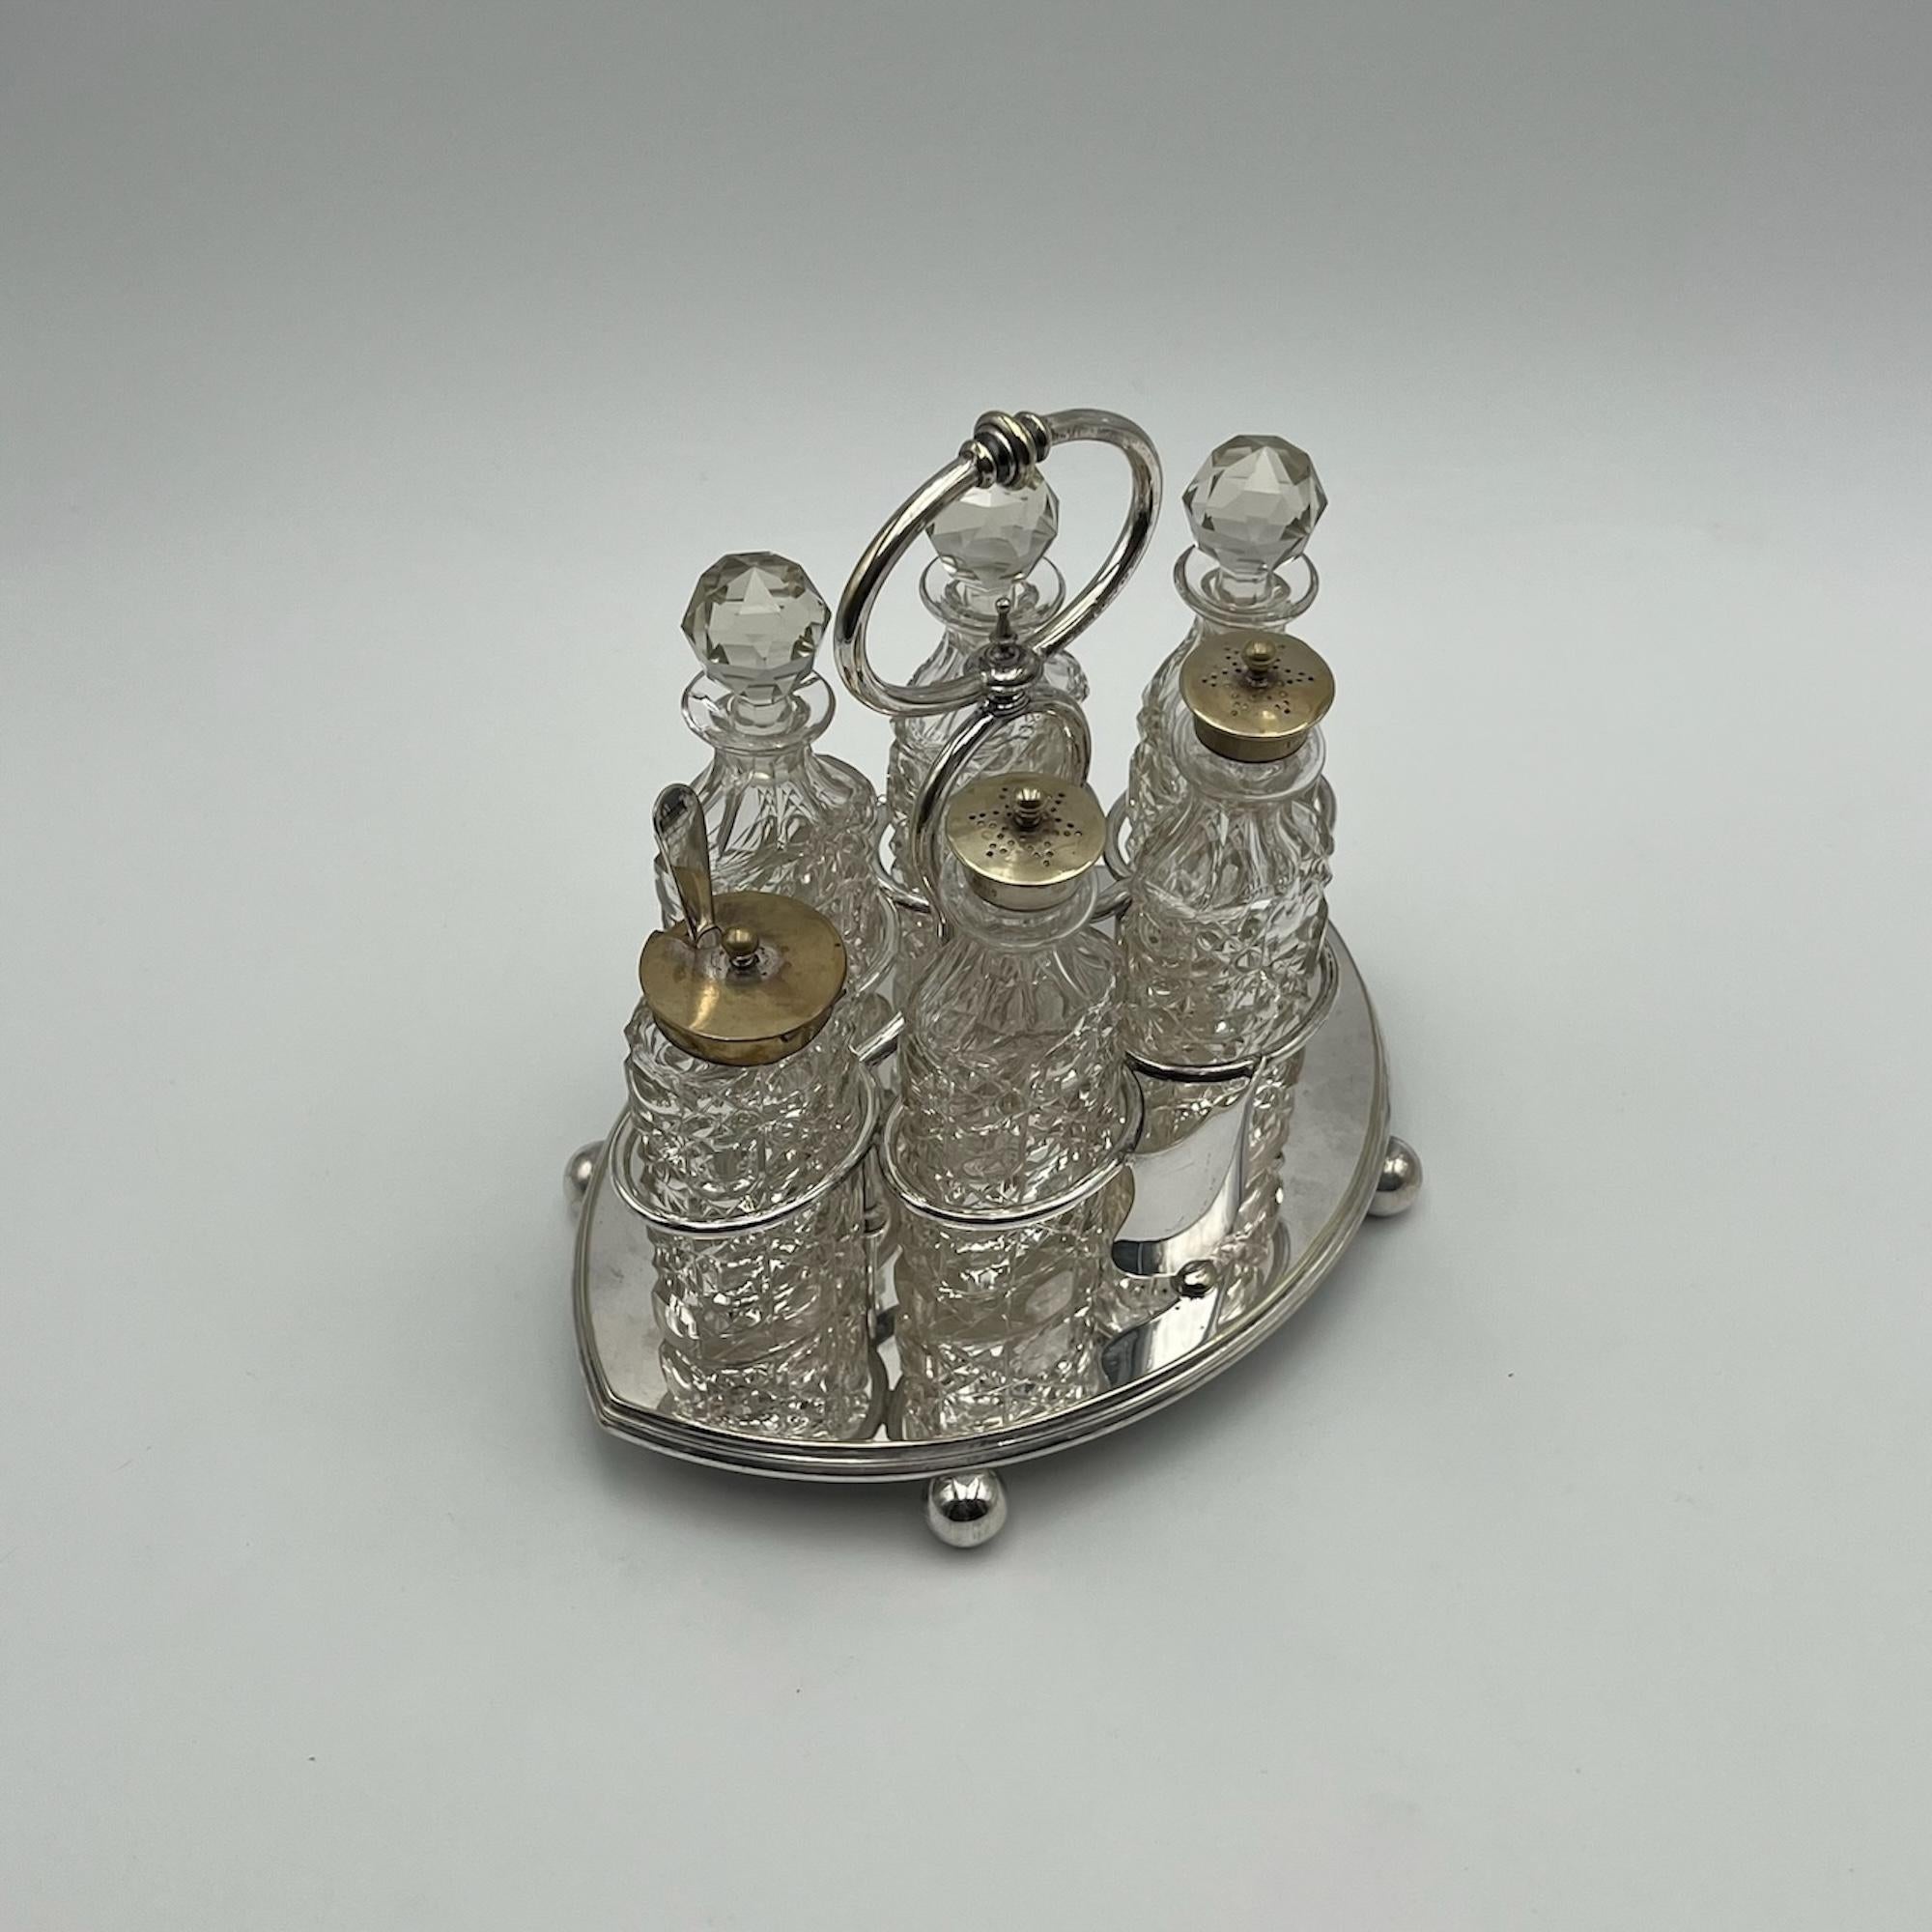 Rare 1940s Crystal Ampoule Set with Accessories - English Craftsmanship 5